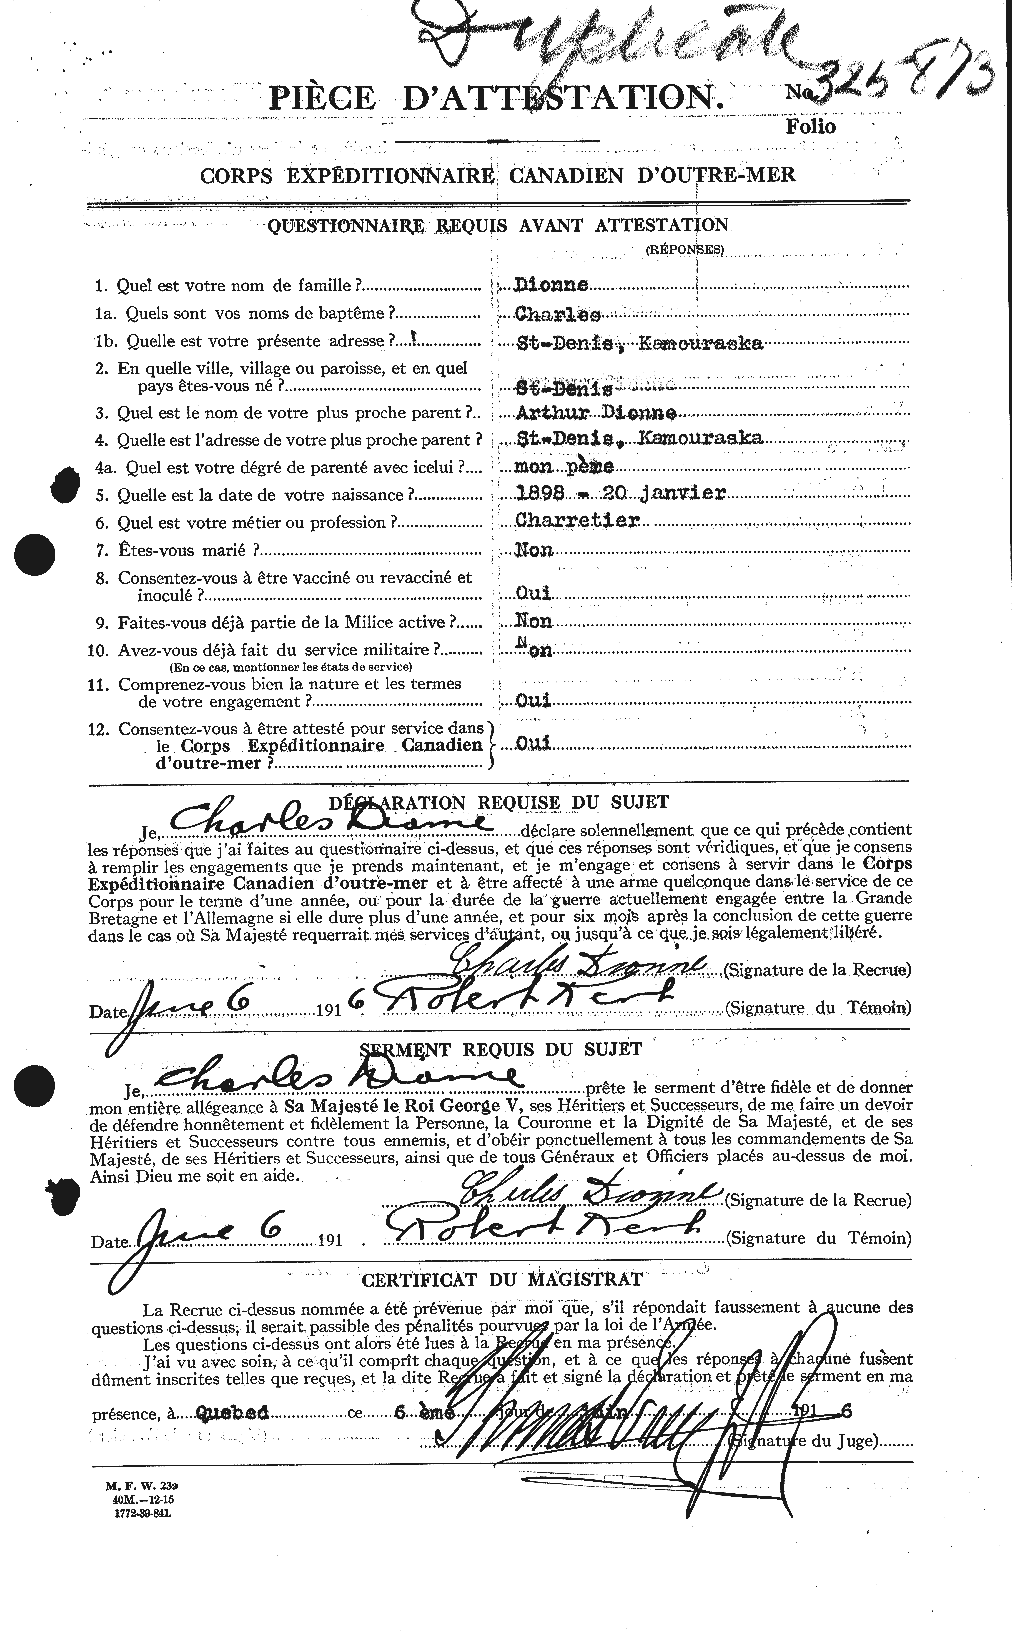 Personnel Records of the First World War - CEF 292565a